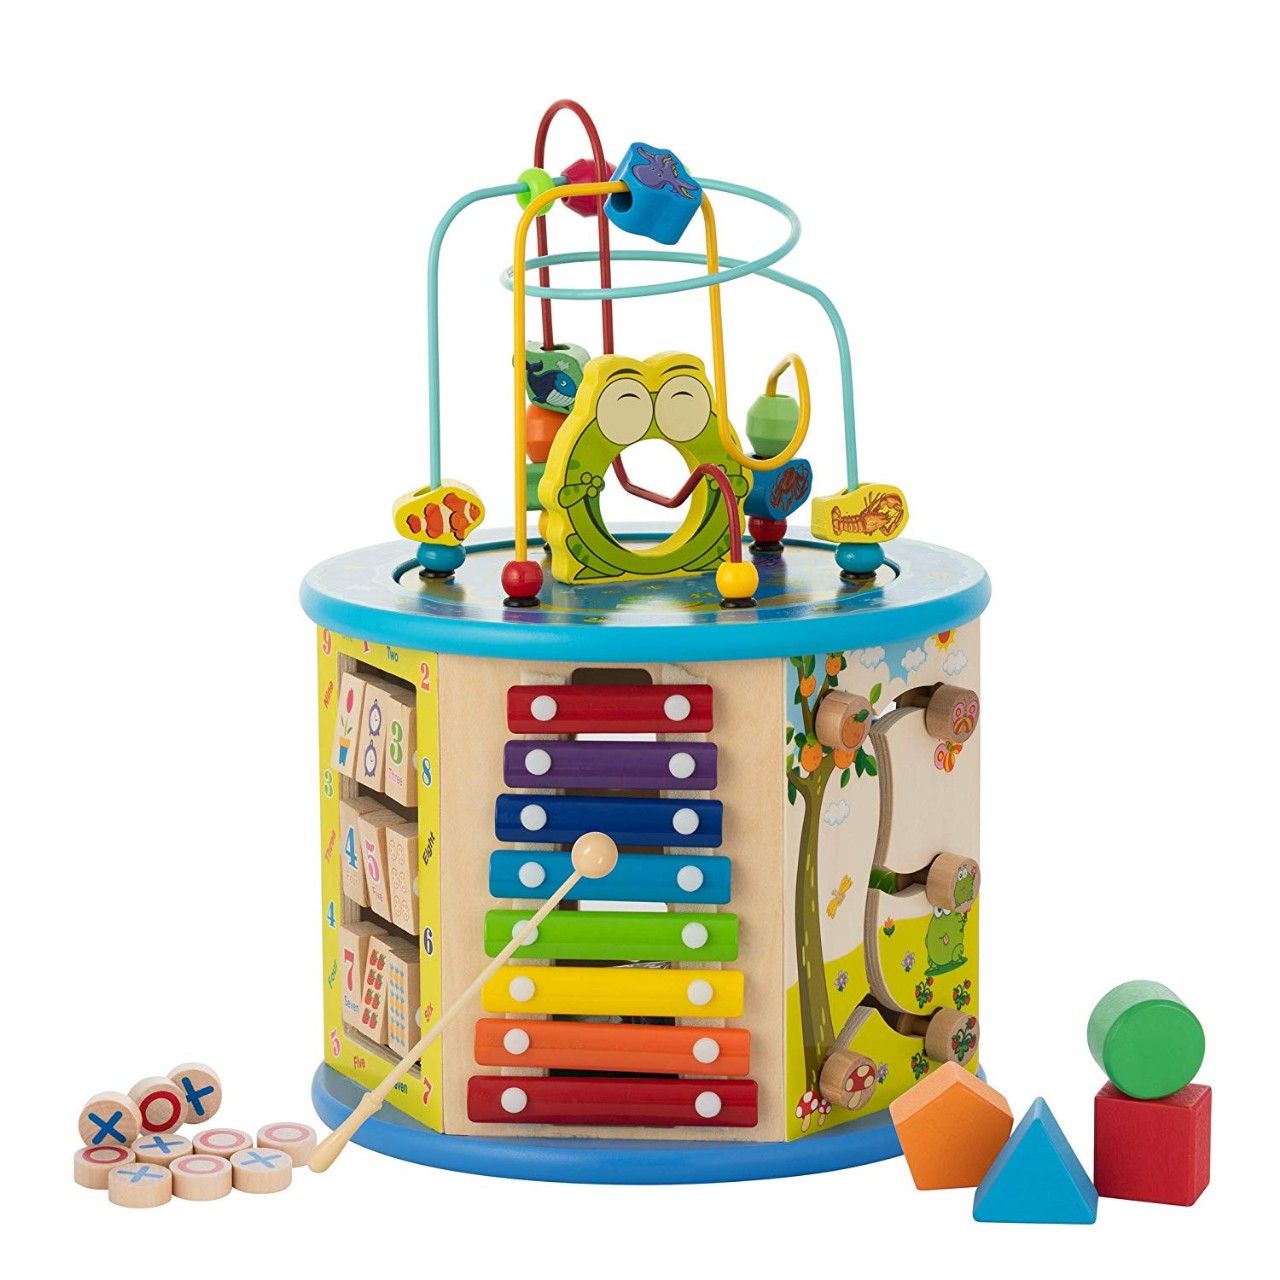 TOYS Activity Cube Wooden Activity Center 8-in-1 Toys Educational and Learning for Boys and Girls